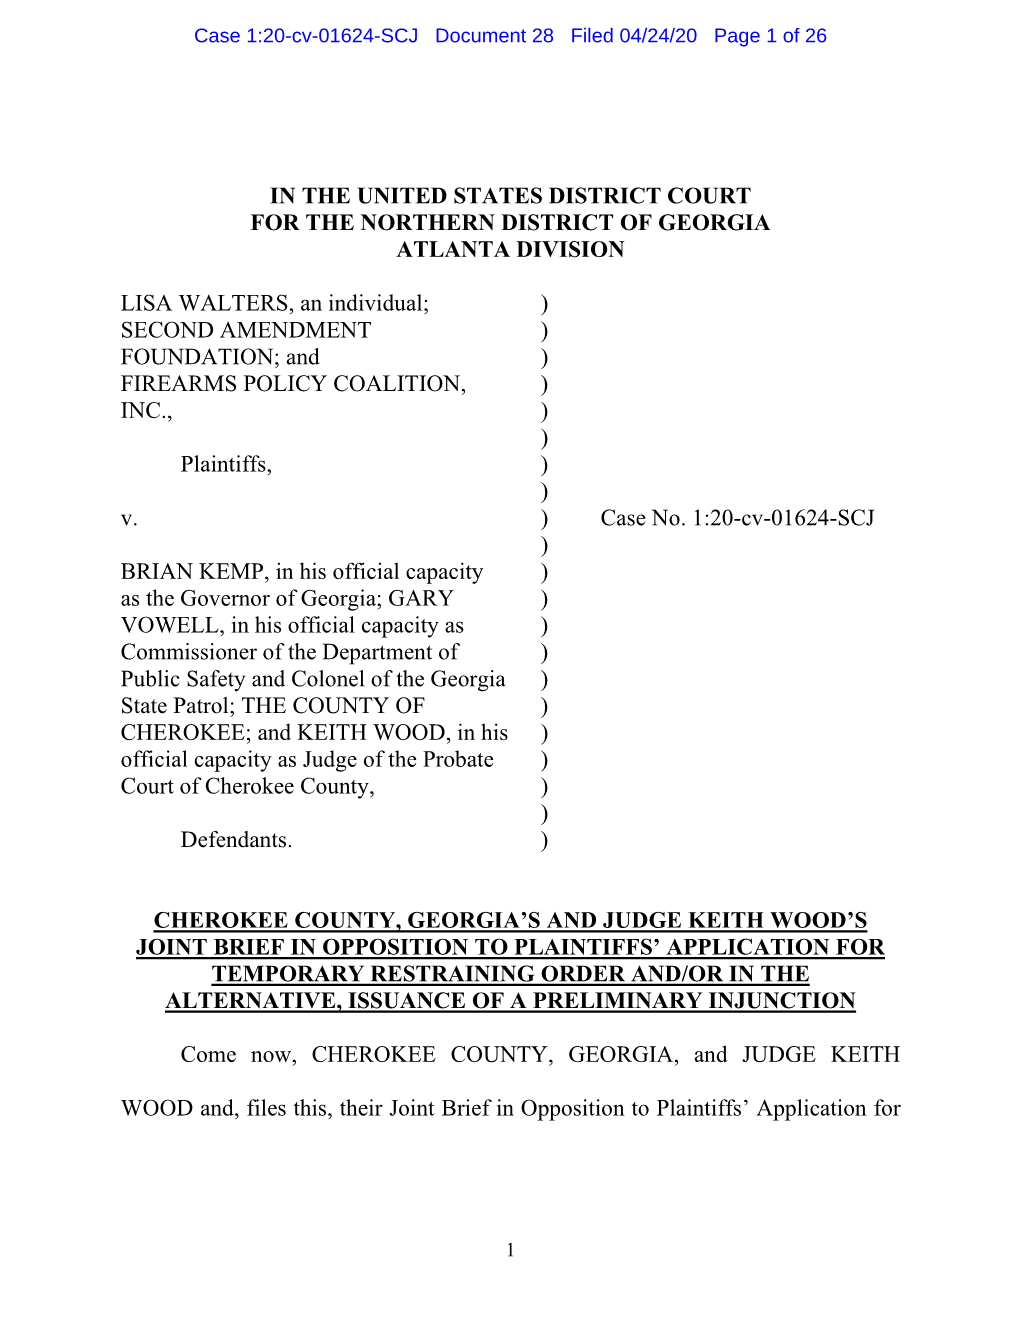 Case 1:20-Cv-01624-SCJ Document 28 Filed 04/24/20 Page 1 of 26